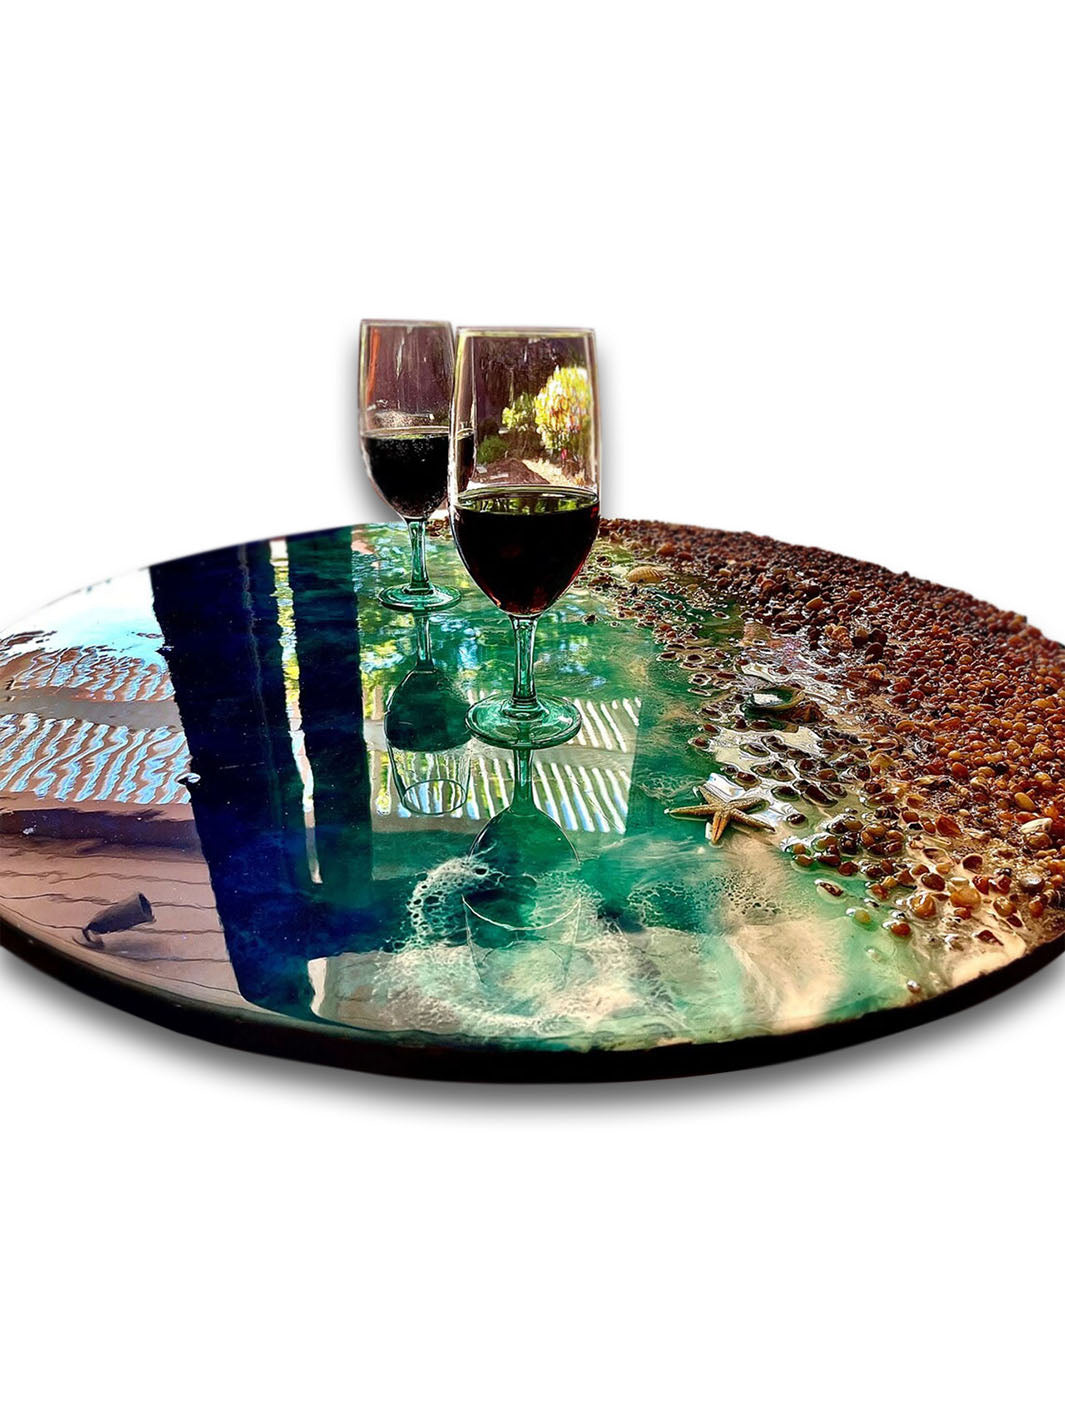 40" Round Beach Inspired Handcrafted Epoxy Resin Dining Table Artsheedal Tables ART0210-1